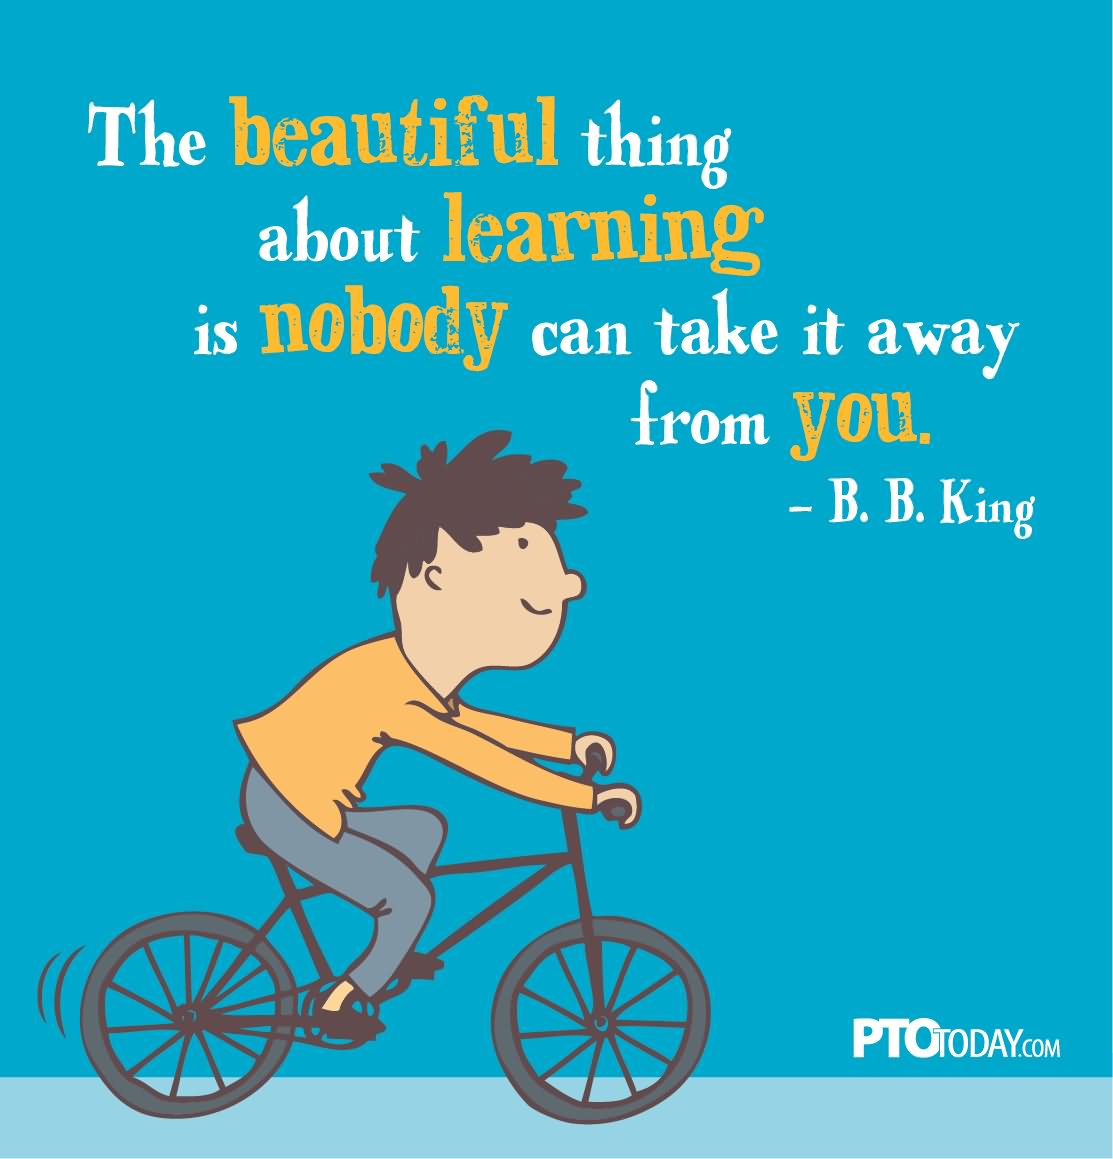 The beautiful thing about learning is nobody can take it away from you. - B. B. King